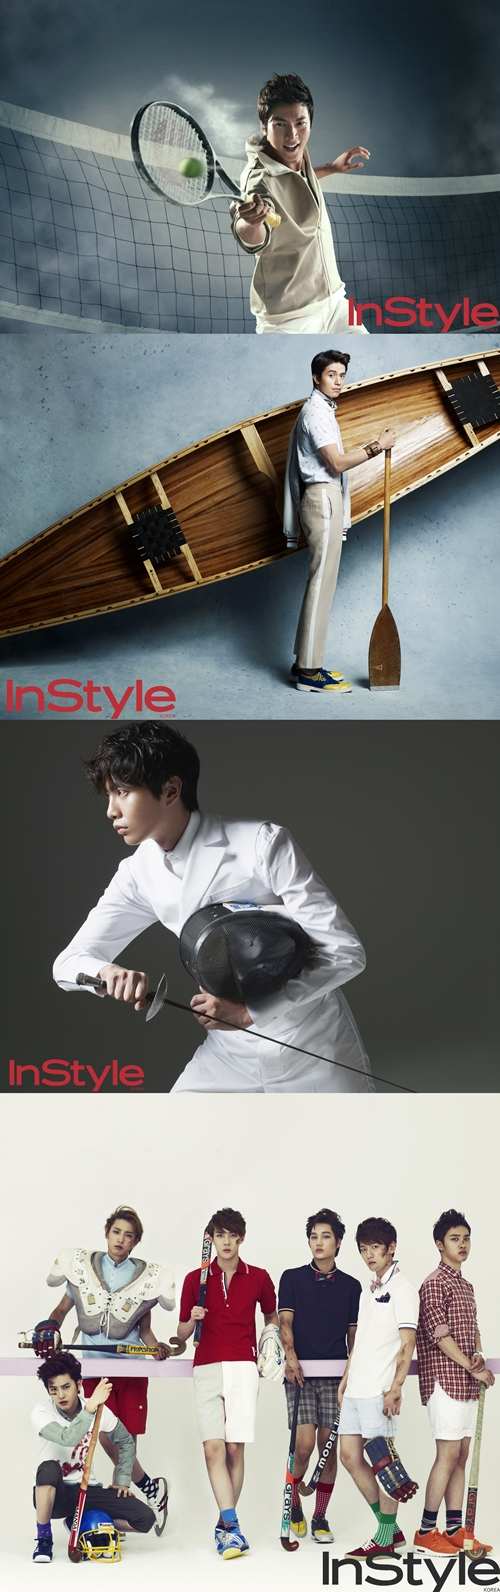 InStyle 奧運特別畫報